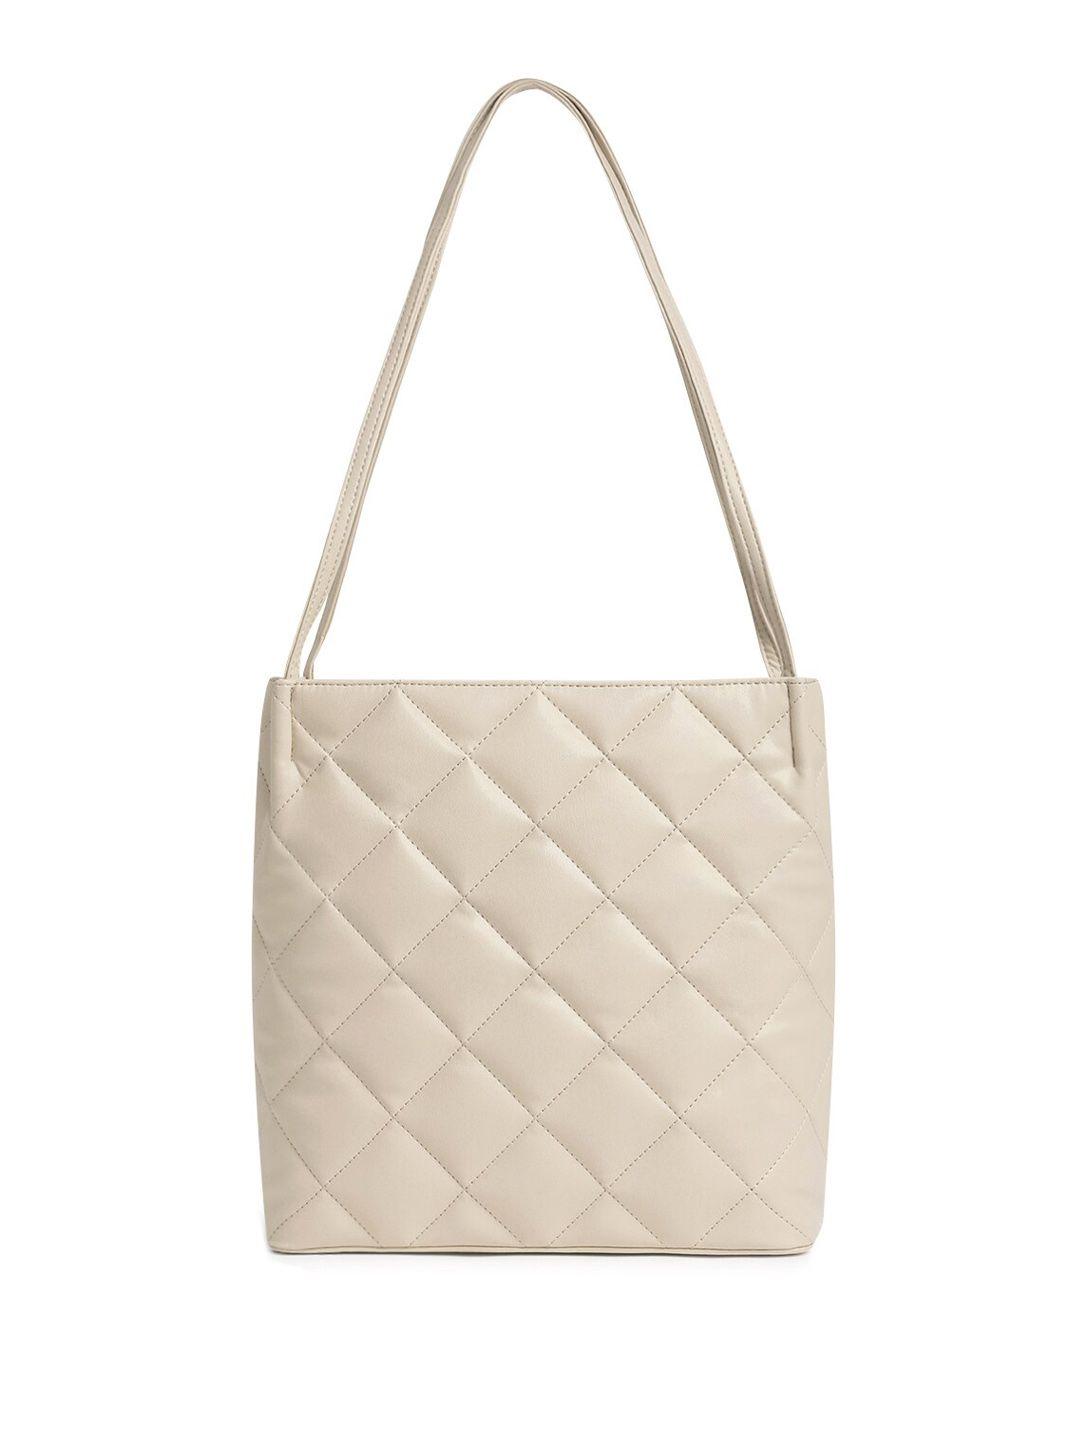 fastrack structured shoulder bag with quilted